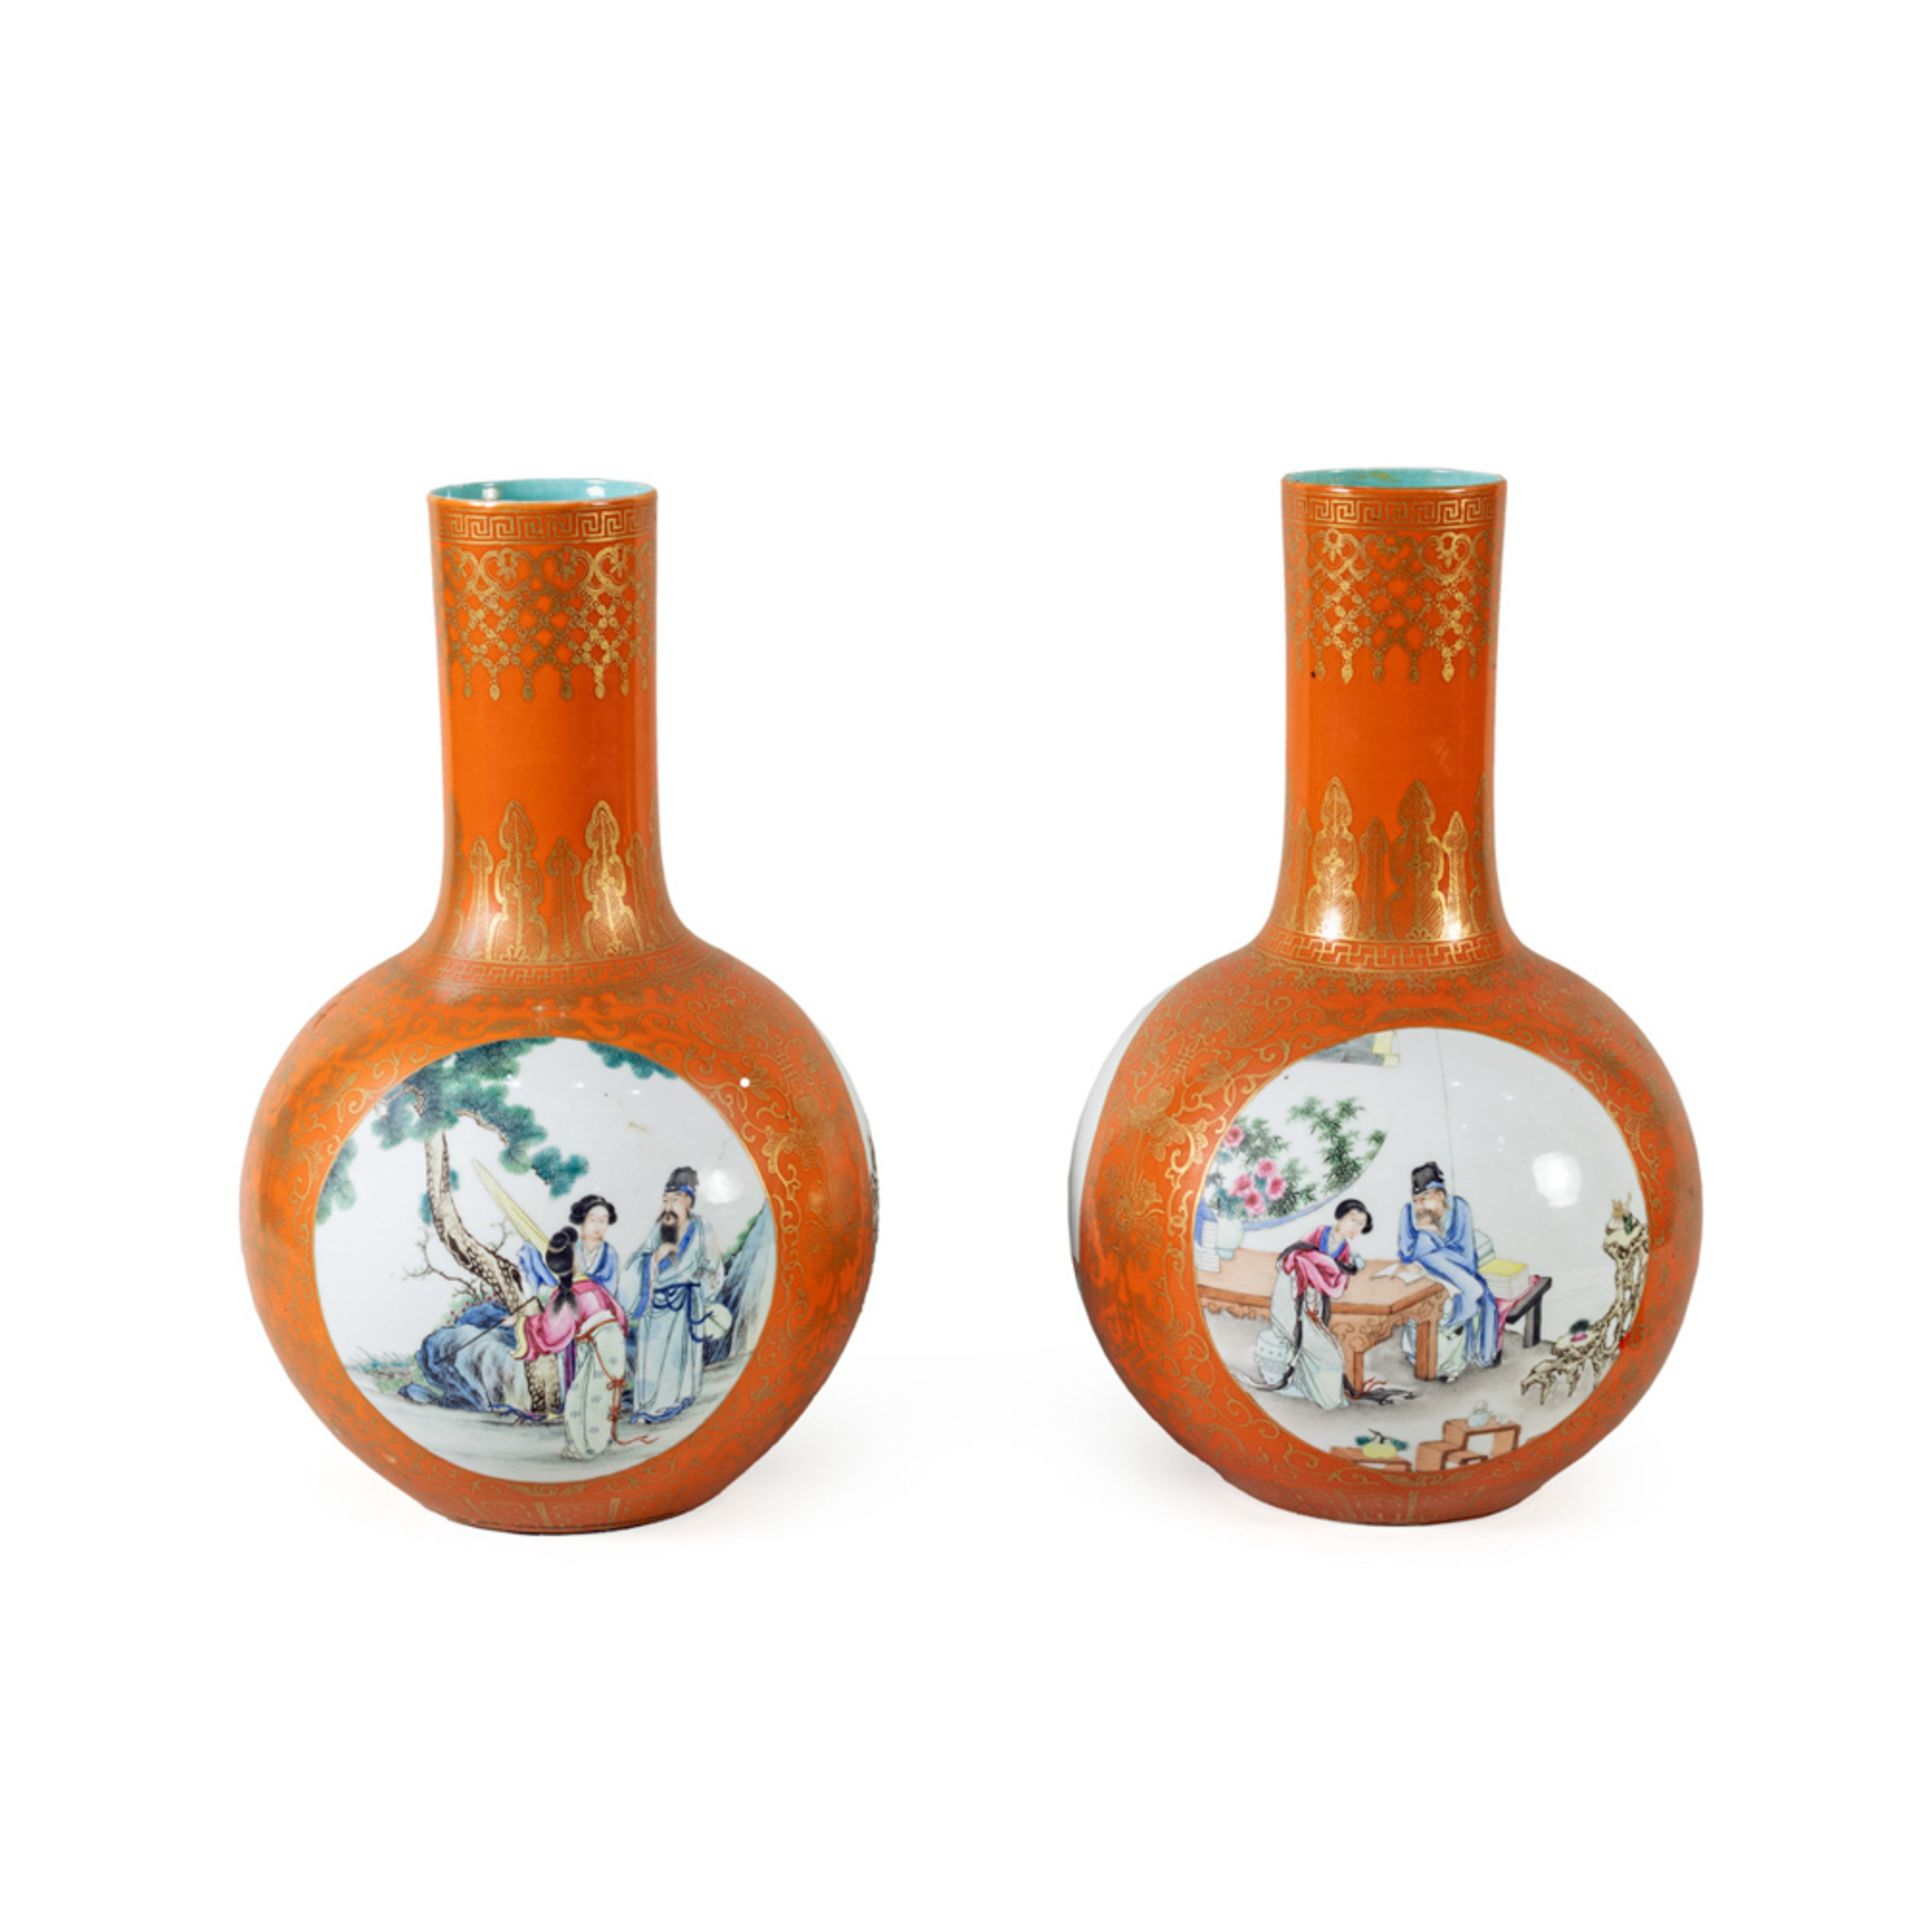 Pair of Tianqiuping polychrome porcelain vases